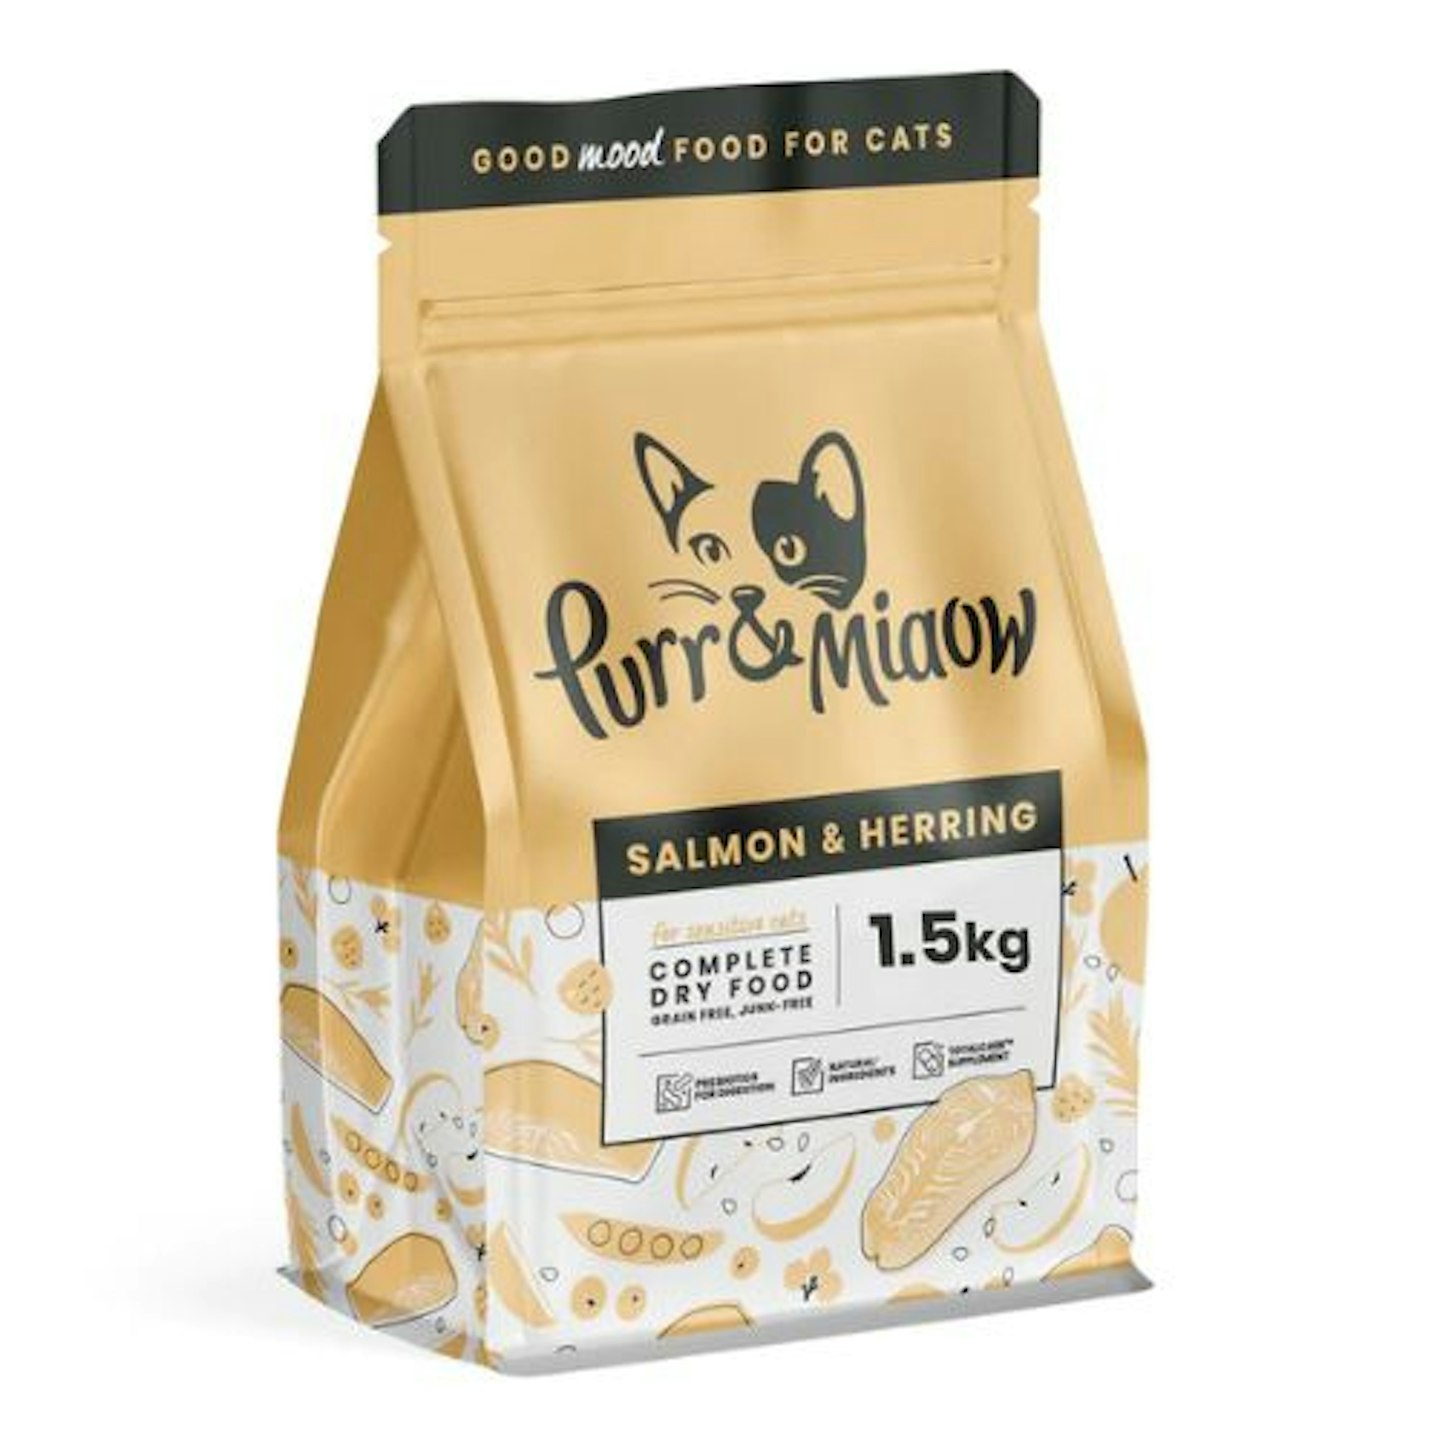 Purr + Miaow, Salmon and Herring Dry Cat Food - 1.5kg